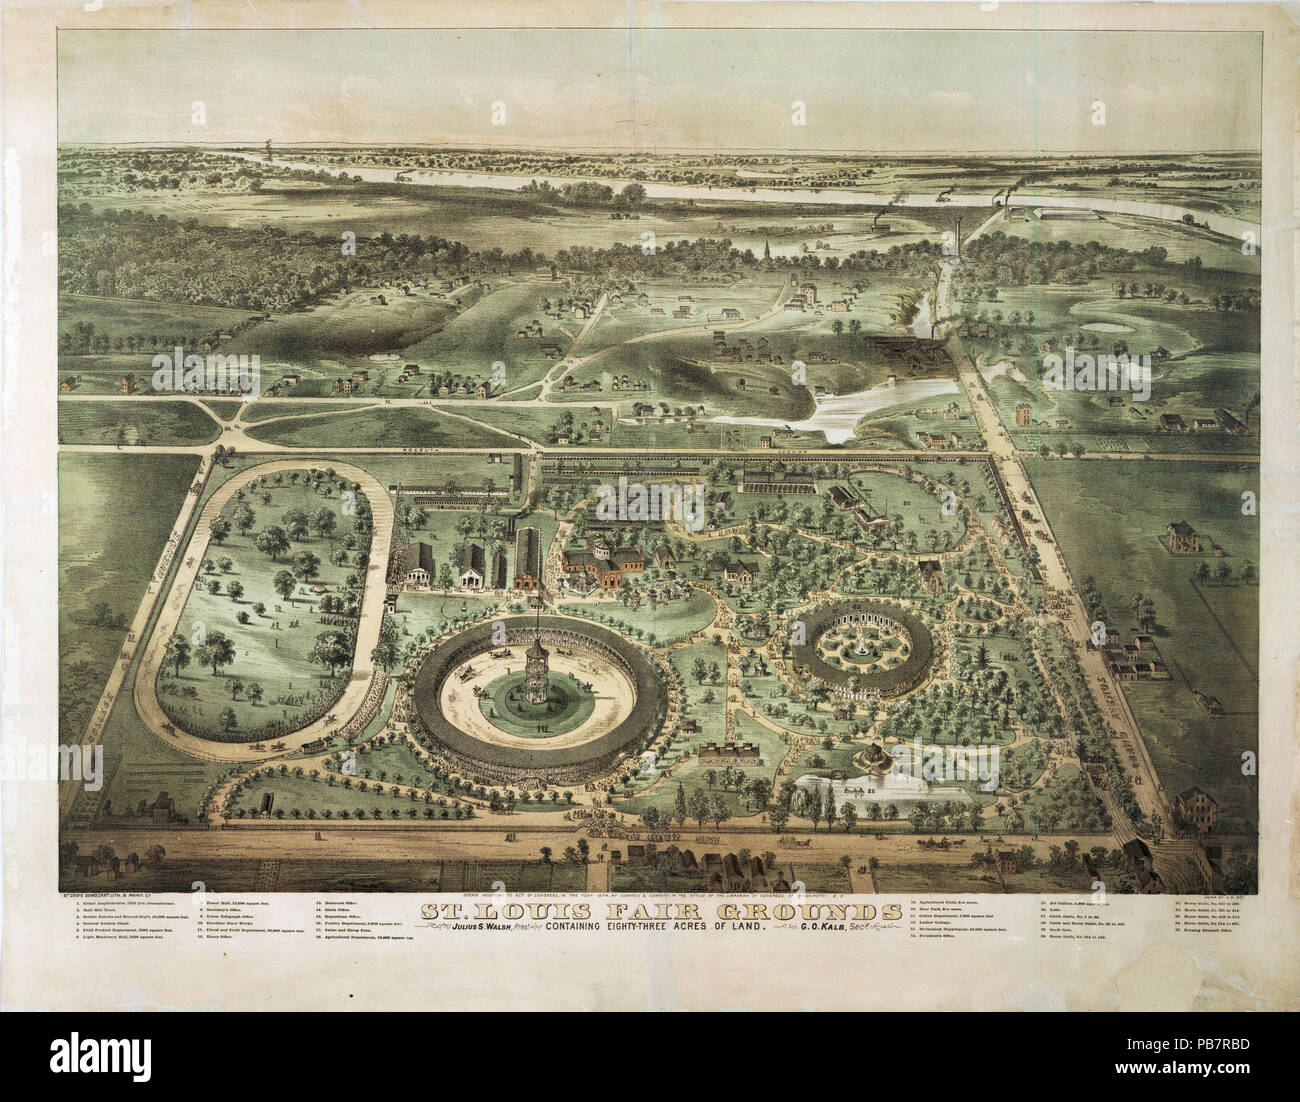 1565 St. Louis Fair Grounds. Containing Eighty-Three Acres of Land Stock Photo